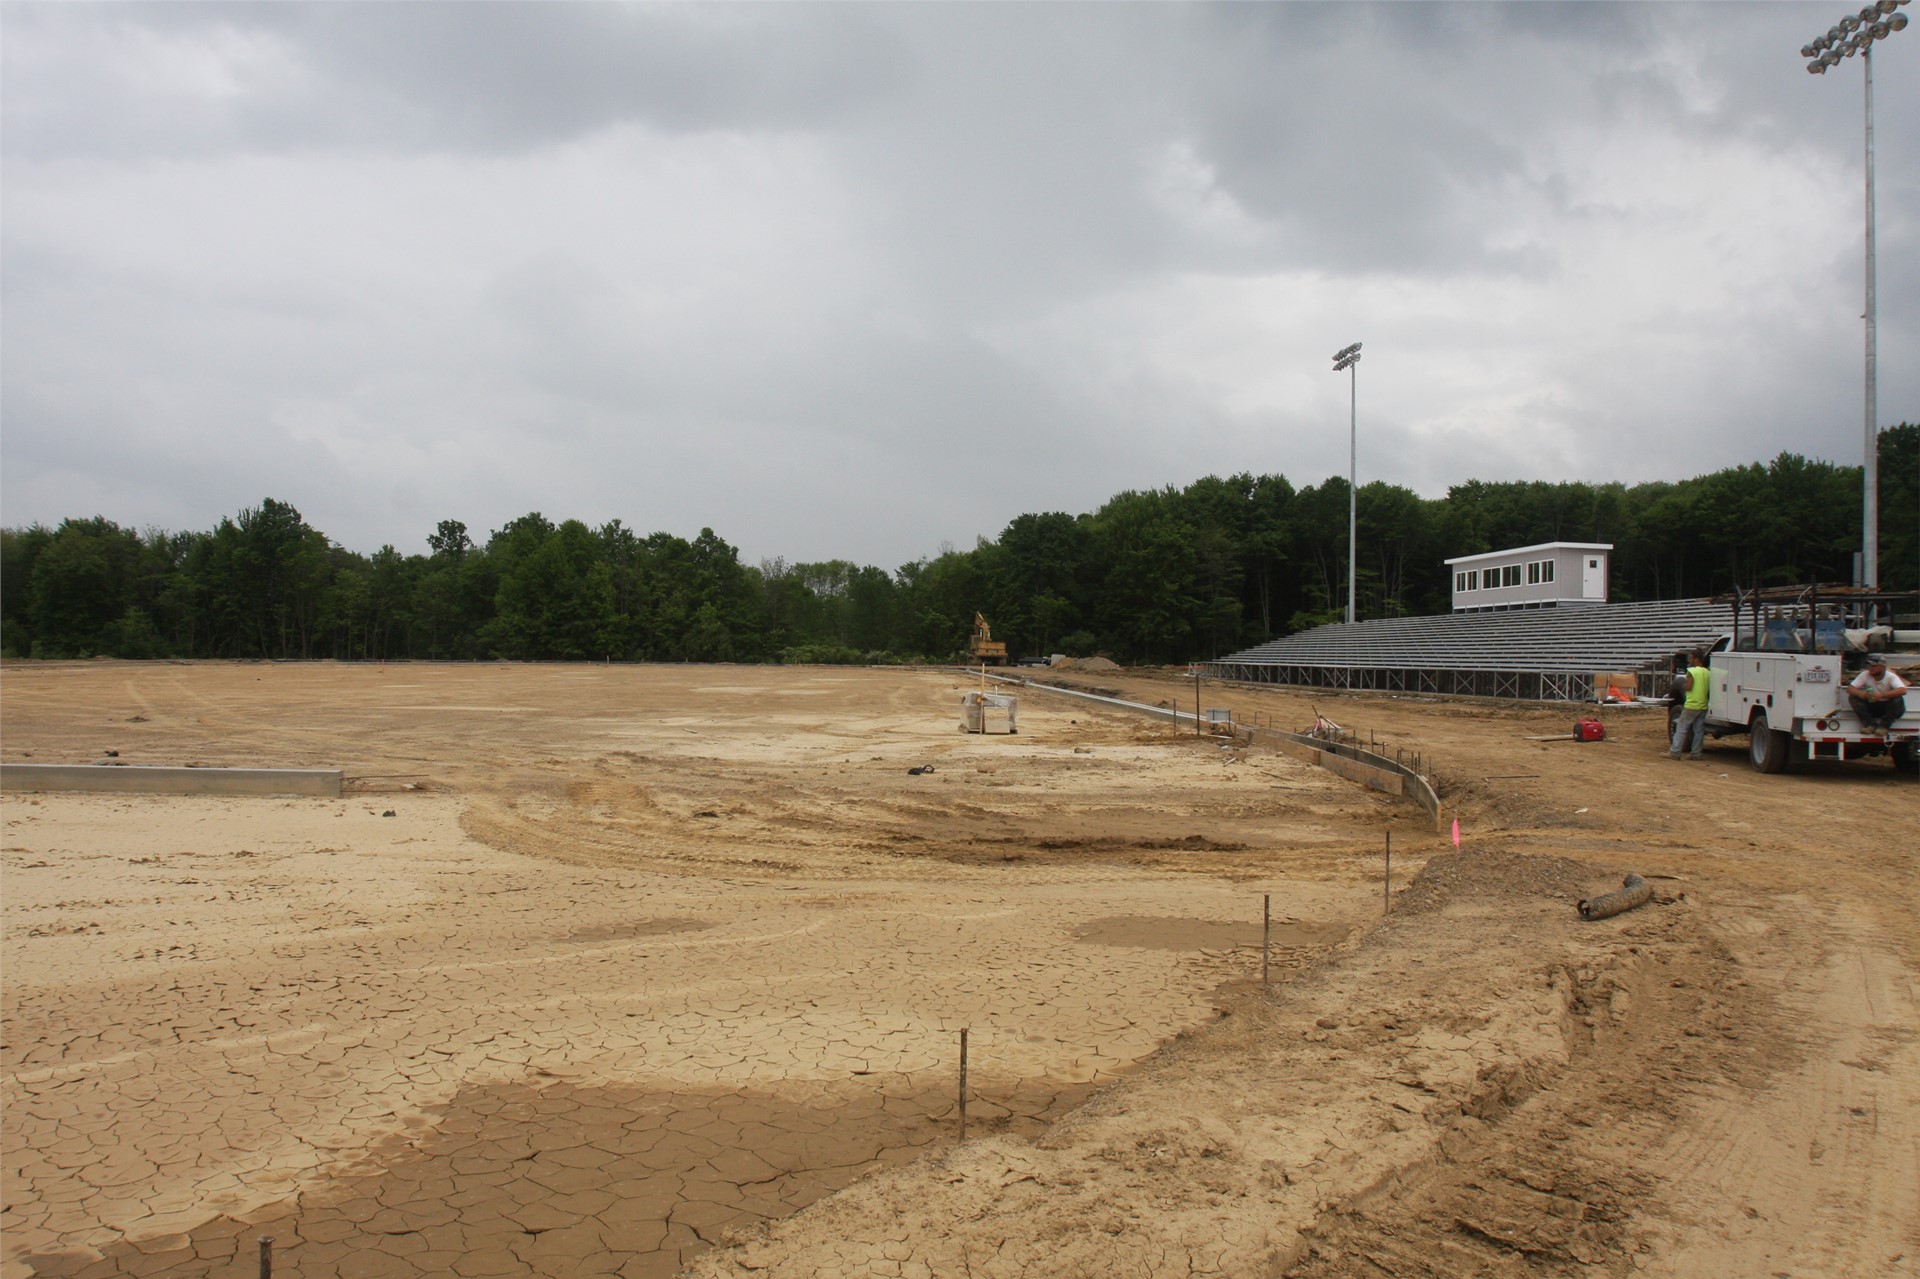 View of field/home stands from northwest corner of track